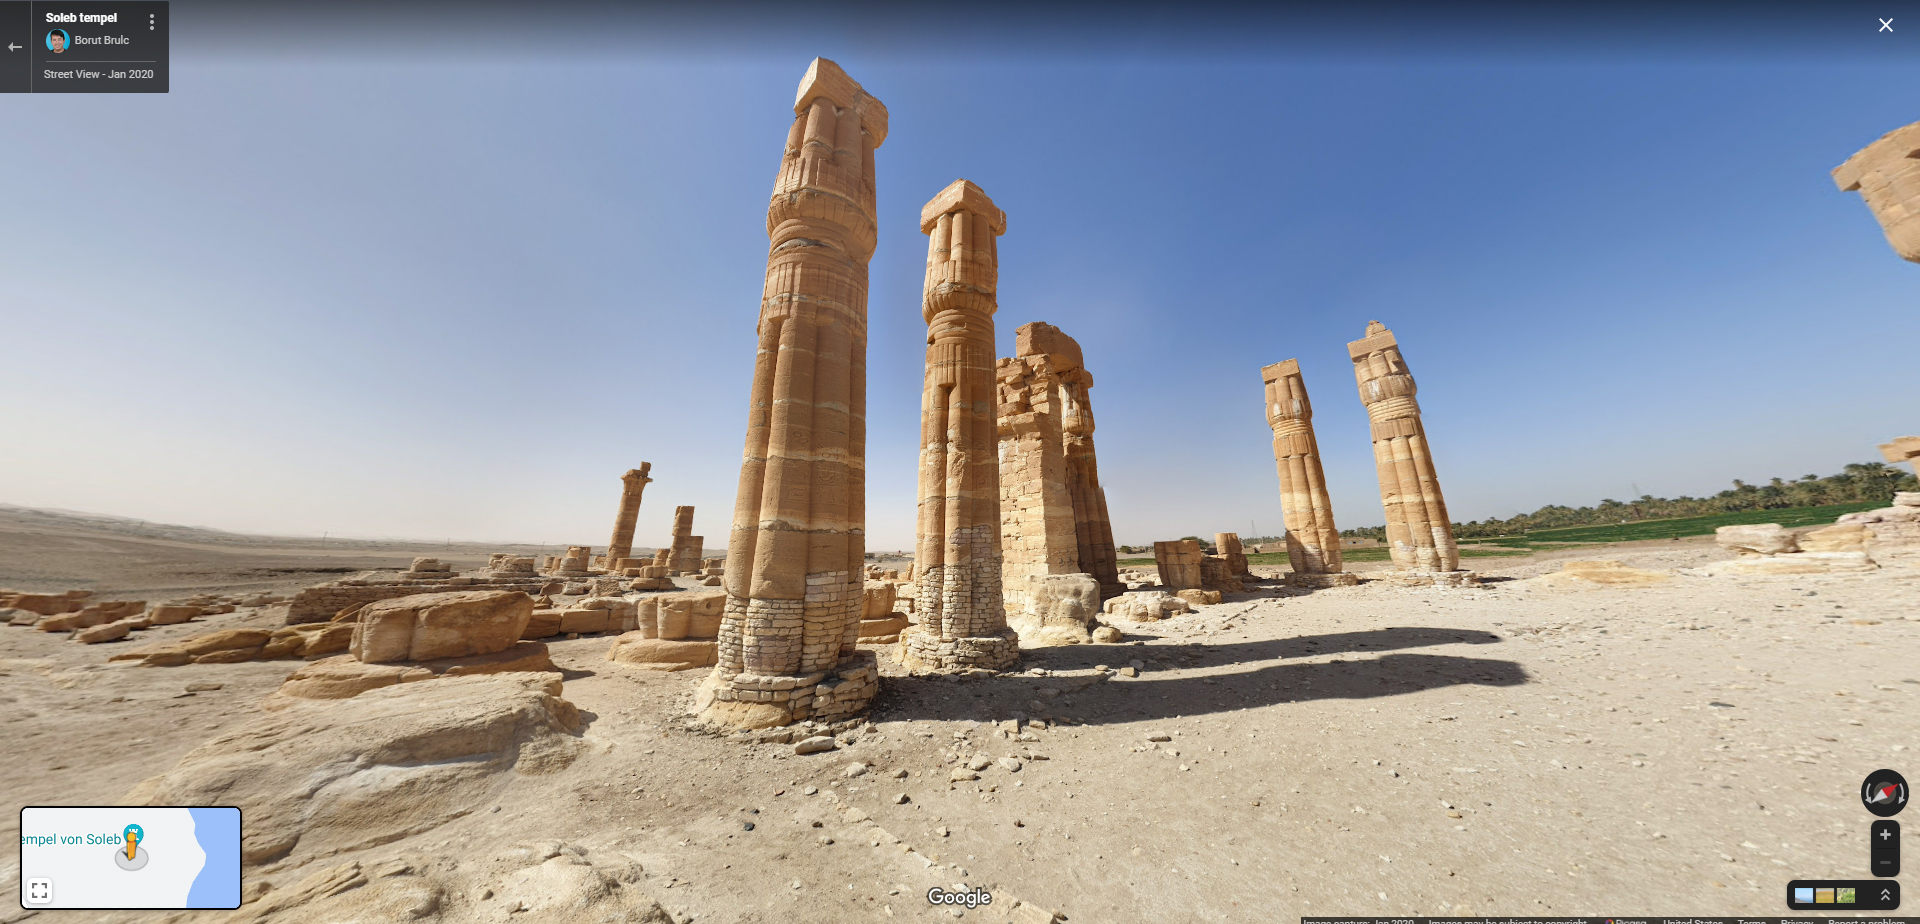 cool places on google earth - monument - Q 3 Wer